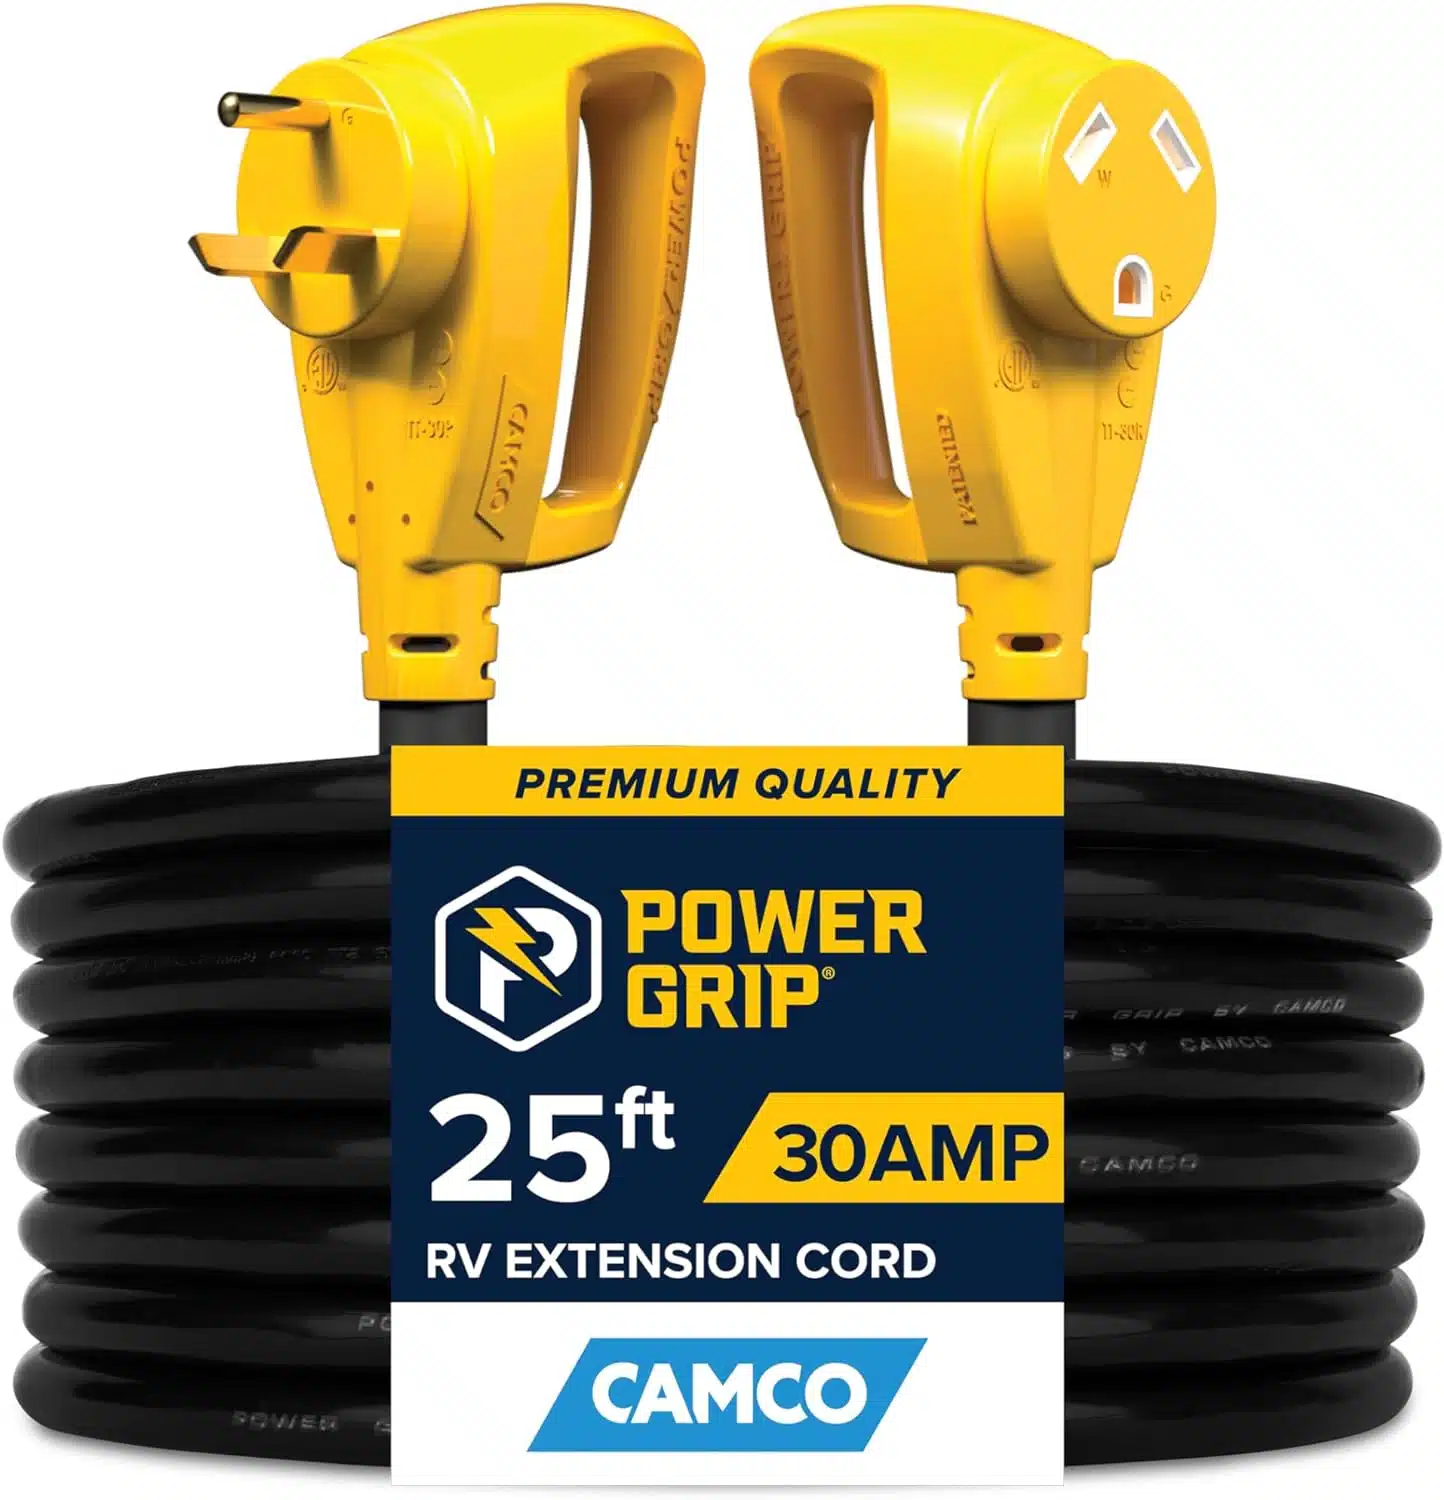 Camco Heavy Duty Outdoor Extension Cord for RV